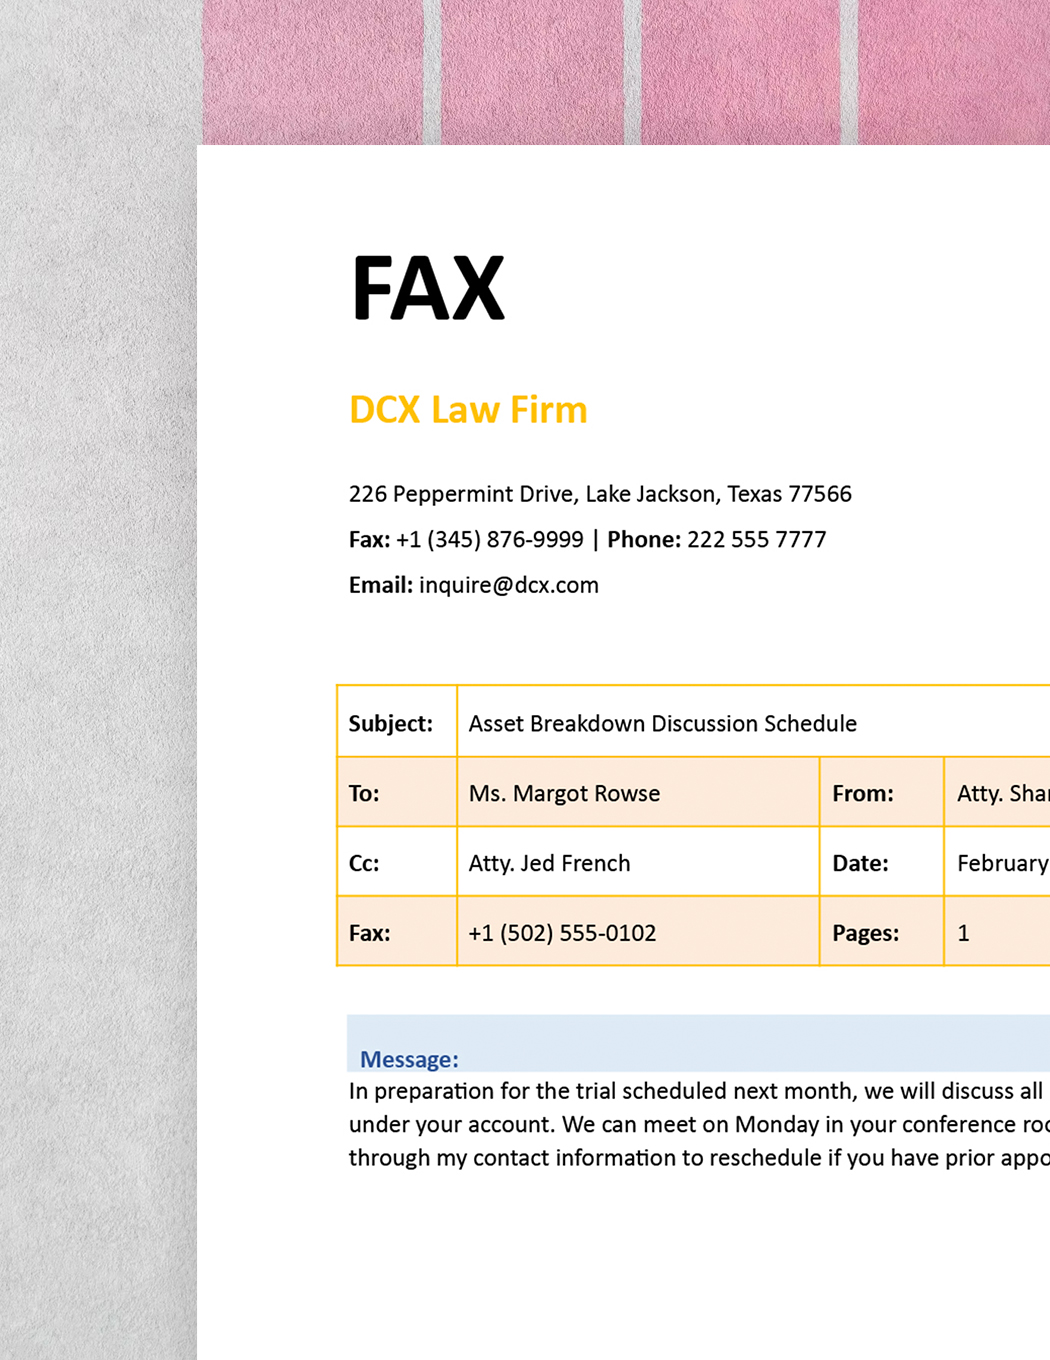 Real Estate Fax Cover Sheet Template